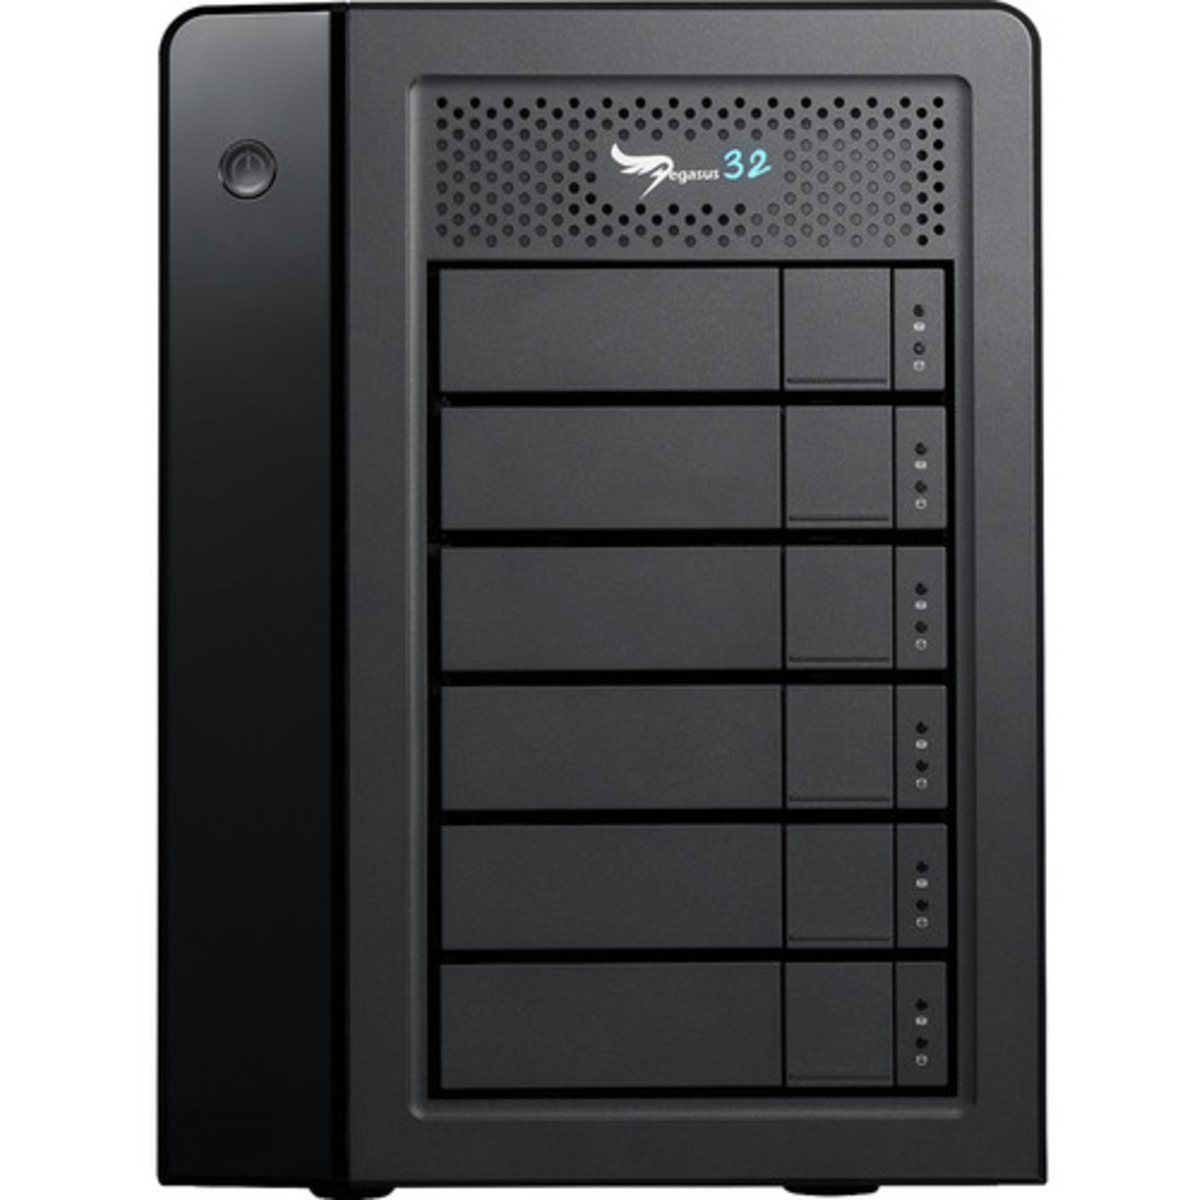 buy $4121 Promise Technology Pegasus32 R6 Thunderbolt 3 12tb Desktop DAS - Direct Attached Storage Device 6x2000gb Western Digital Red SA500 WDS200T1R0A 2.5 SATA 6Gb/s SSD NAS Class Drives Installed - Burn-In Tested - nas headquarters buy network attached storage server device das new raid-5 free shipping usa Pegasus32 R6 Thunderbolt 3